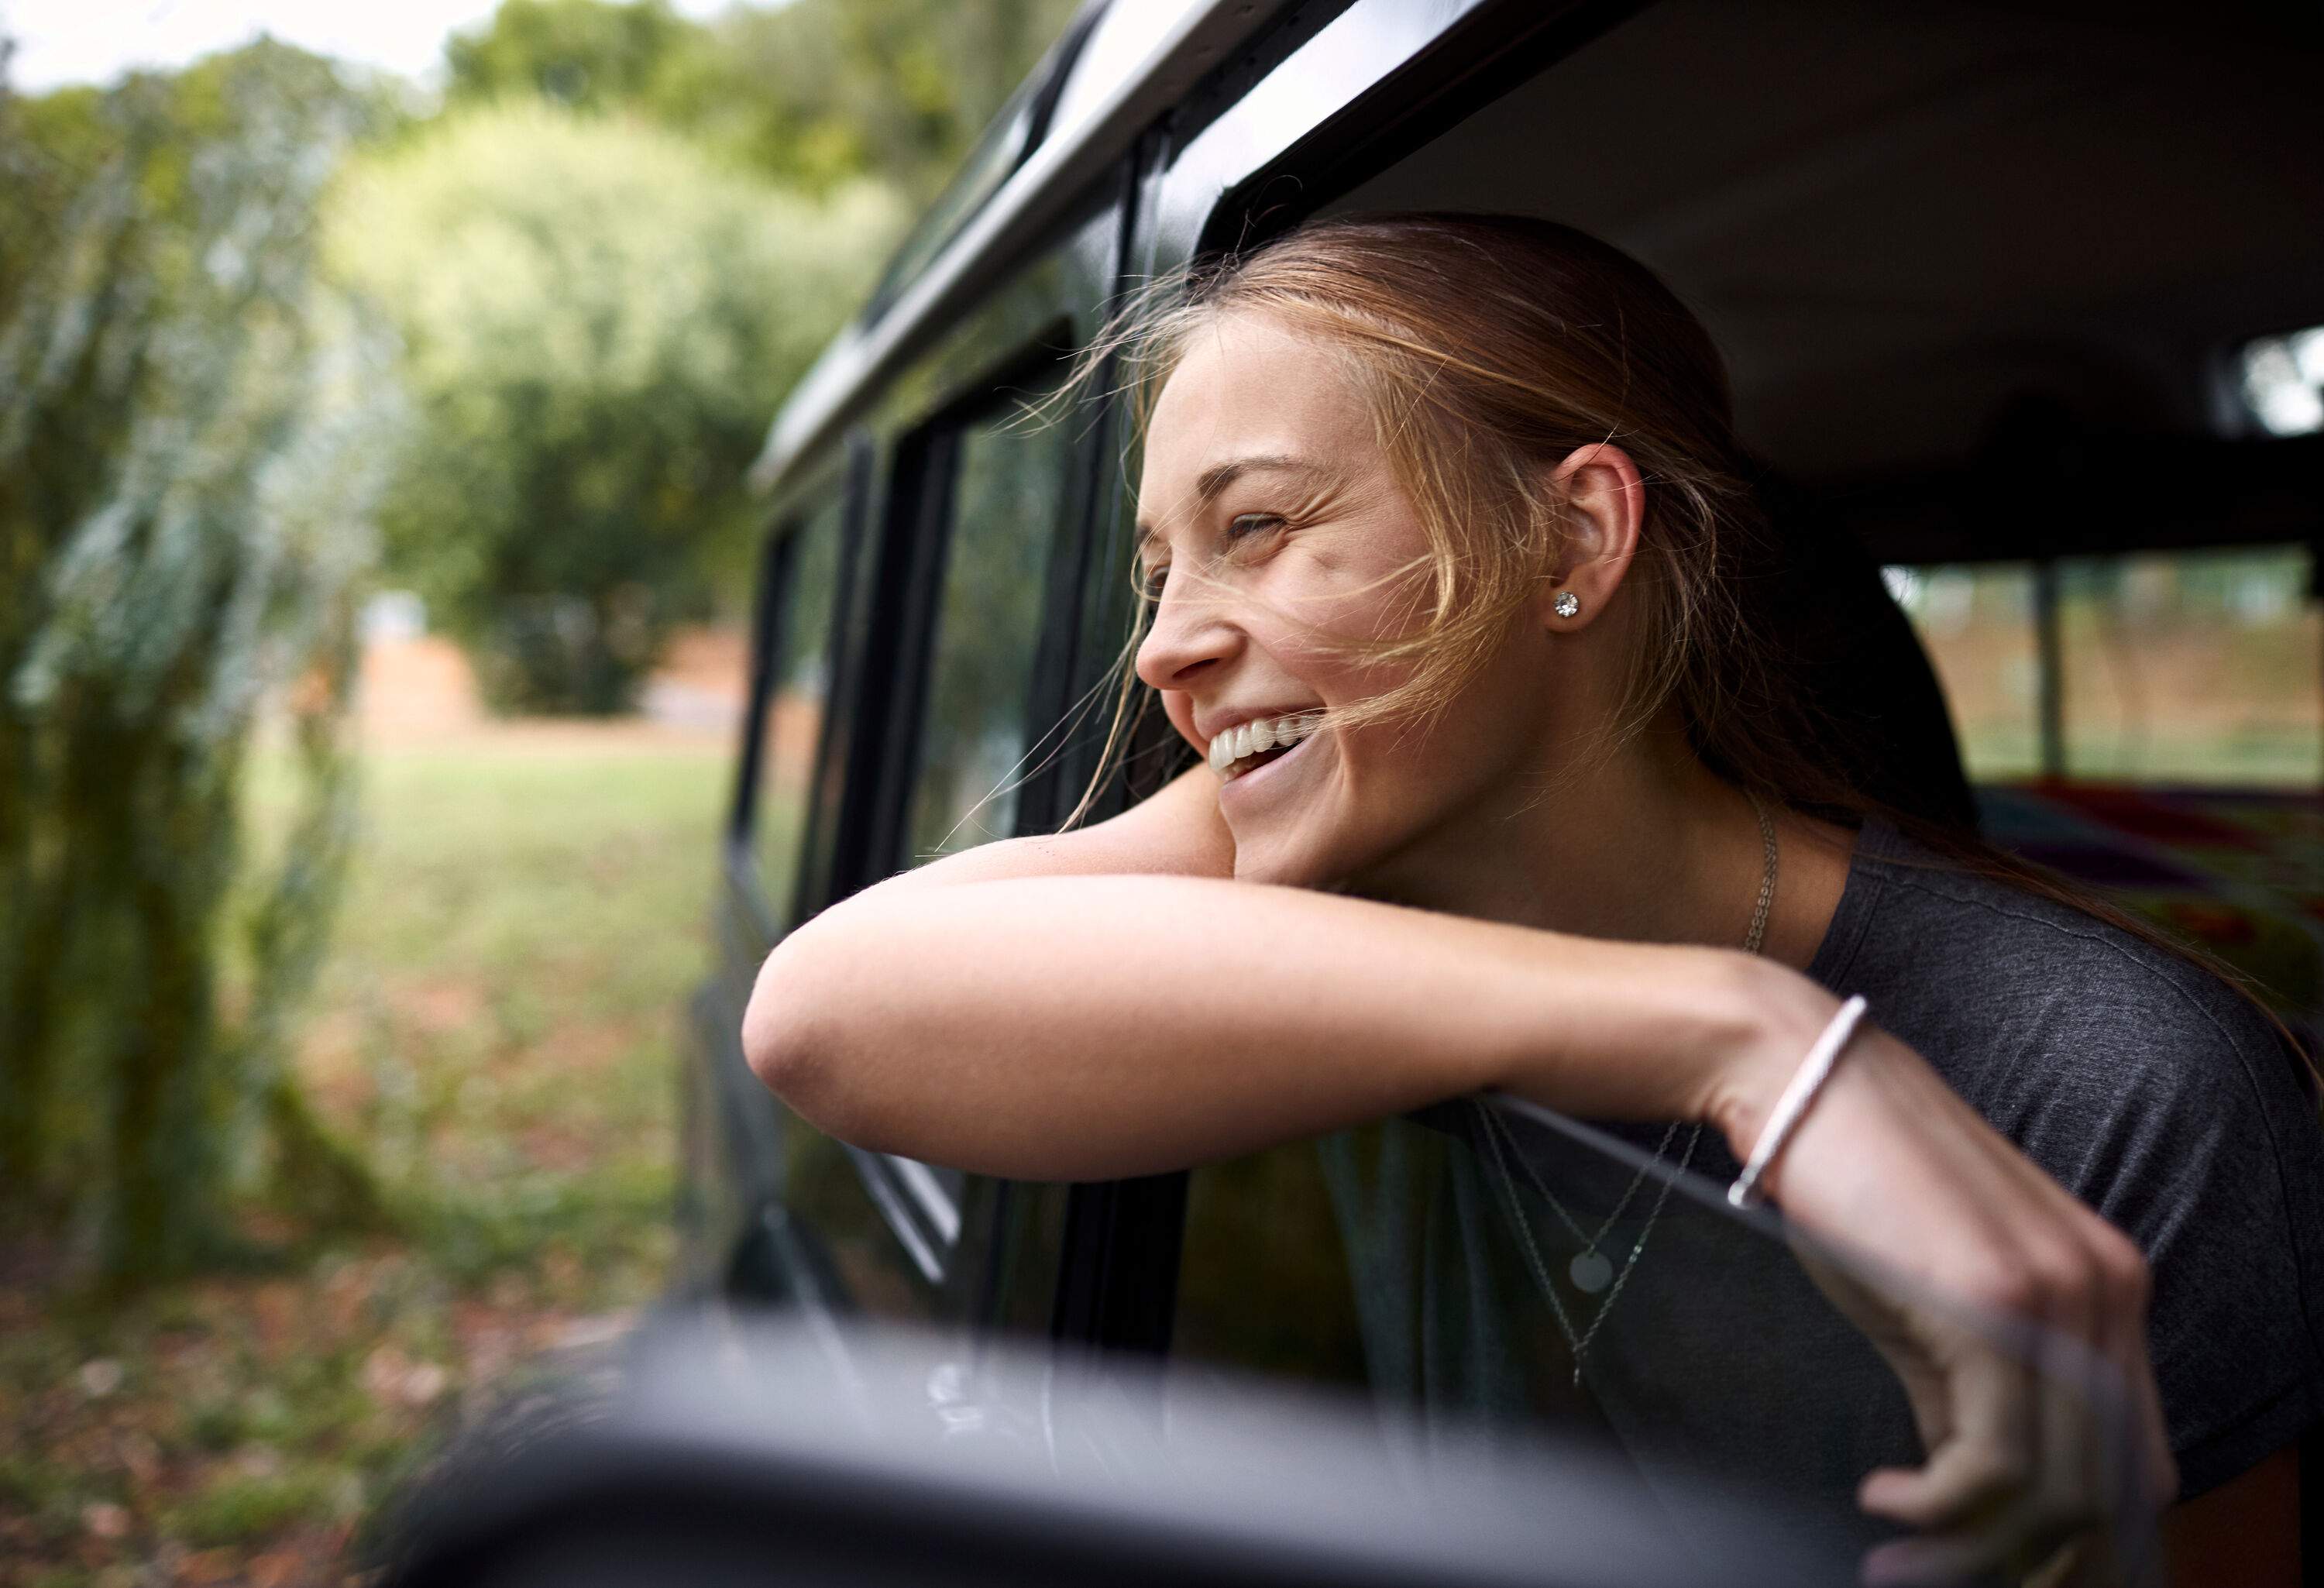 A woman smiles as she leans on the car's window while enjoying nature's breeze.